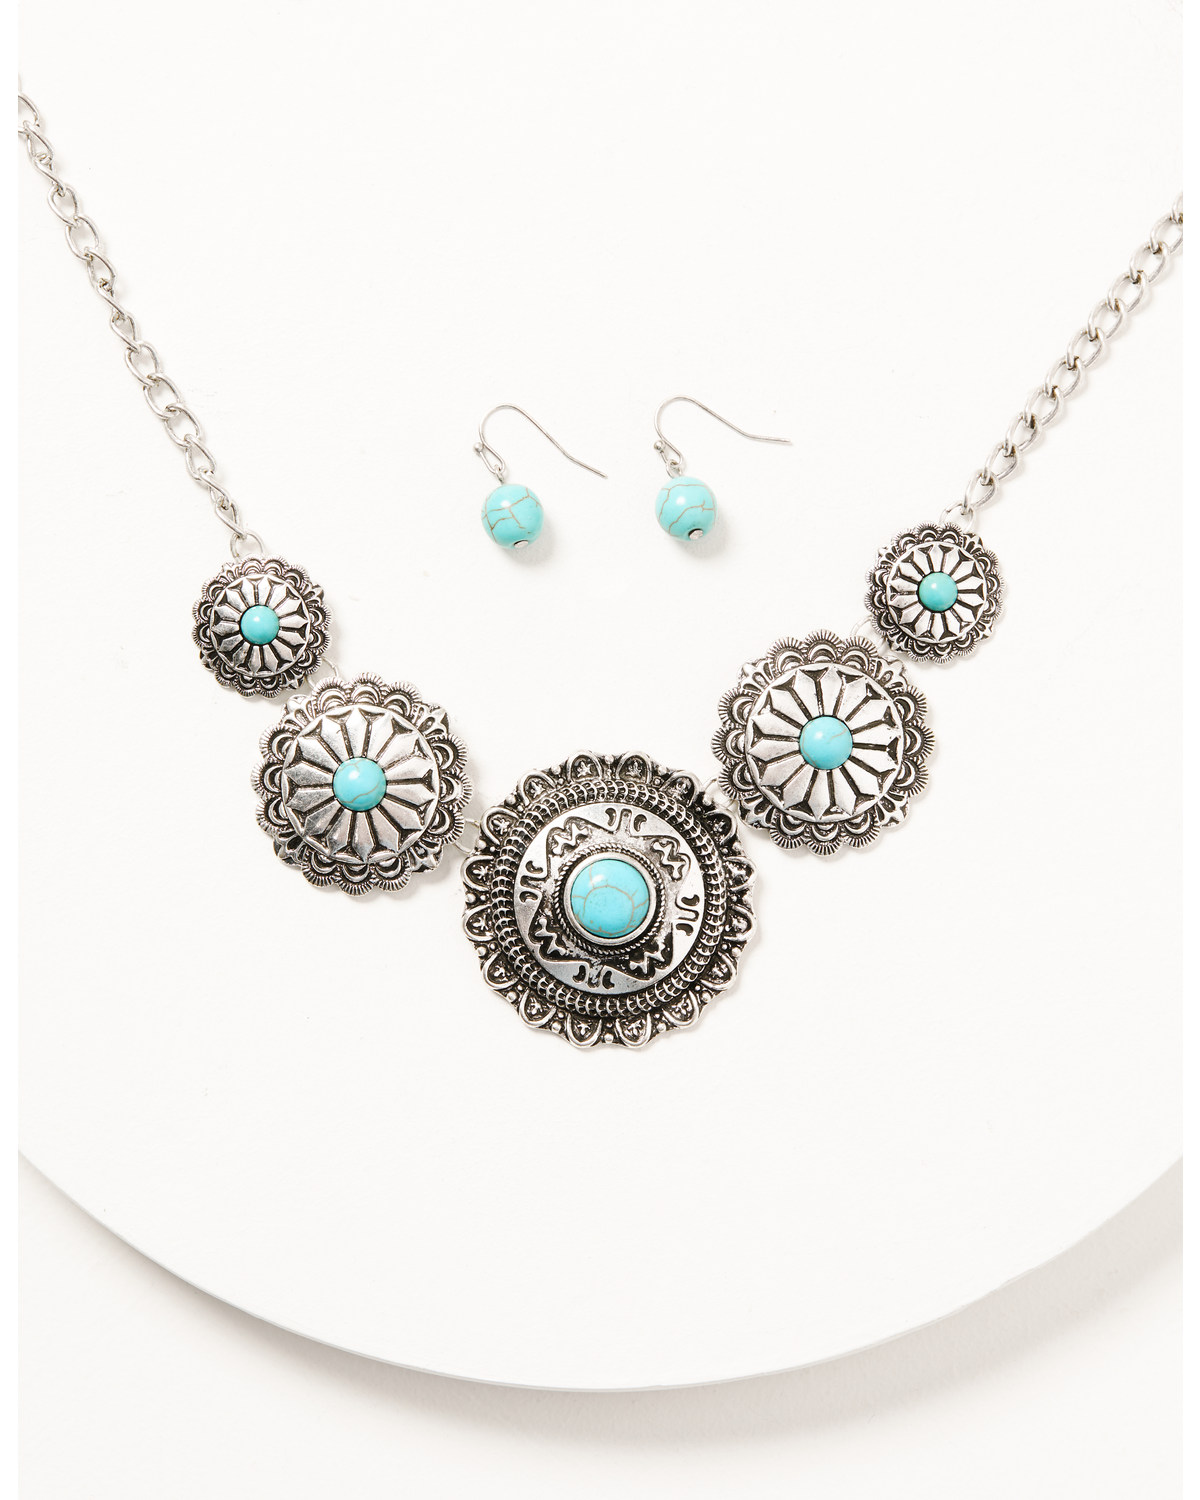 Prime Time Jewelry Women's 5 Concho Necklace and Earrings Set